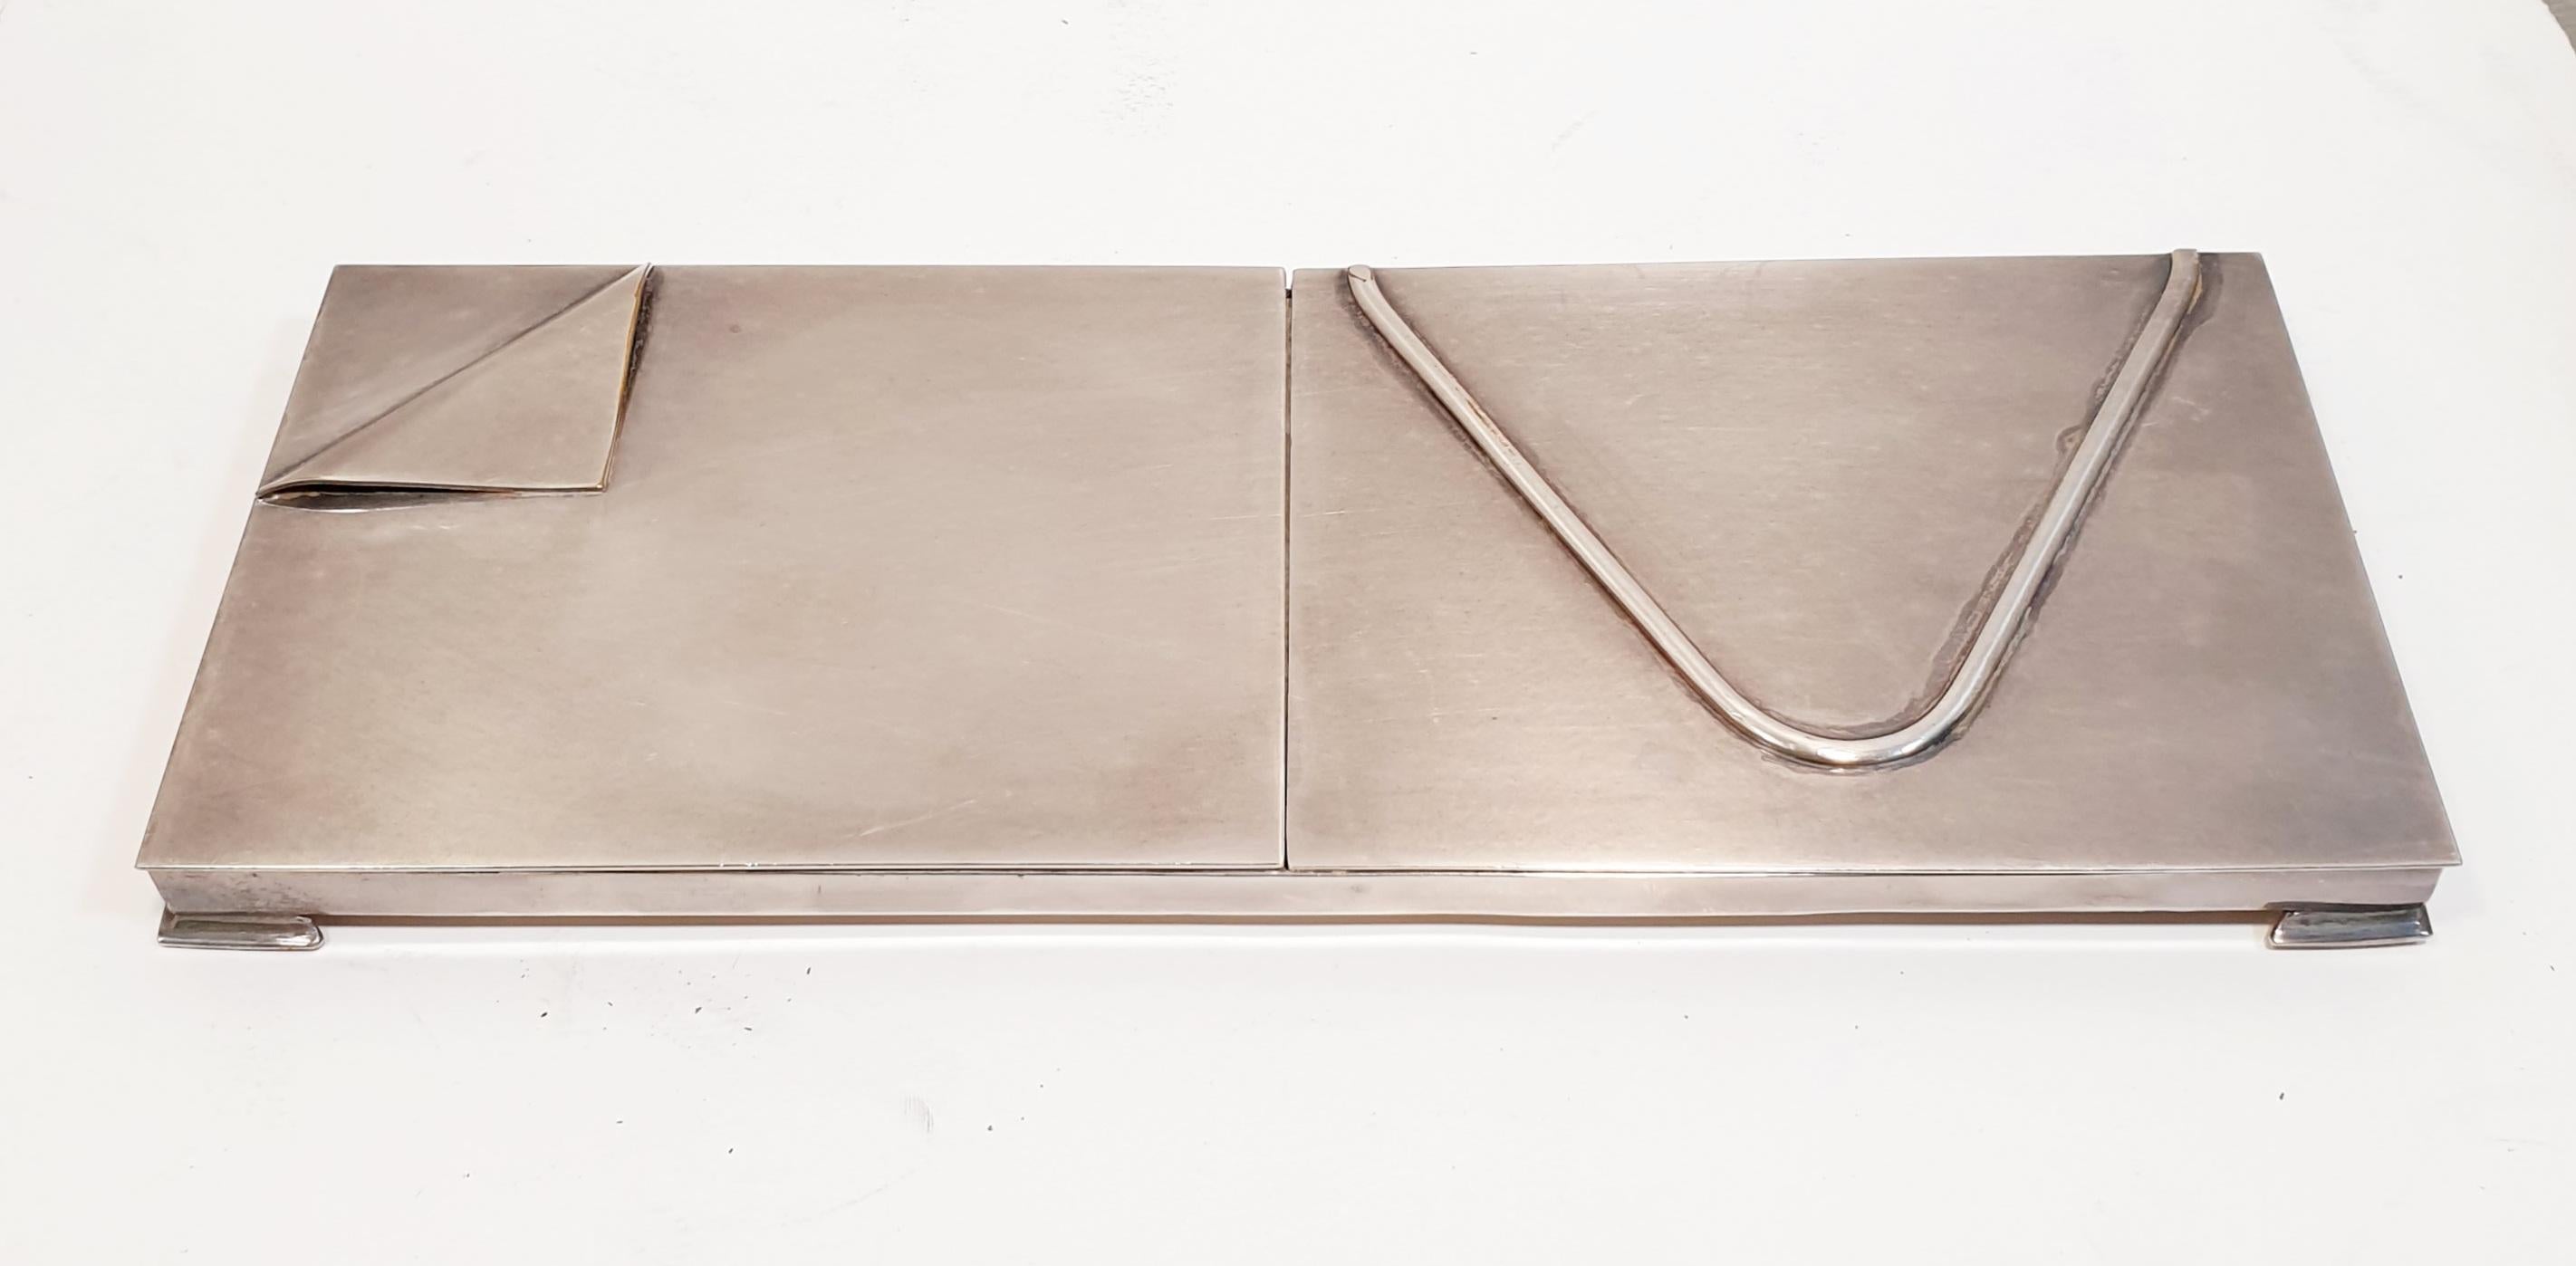  Alpaca Silver Card Holder with Envelope with two departments 
Signed  Almazan, Silver Alpaca  Factory in  Spain

PRADERA is a second generation of a family run business jewelers of reference in Spain, with a rich track record being official